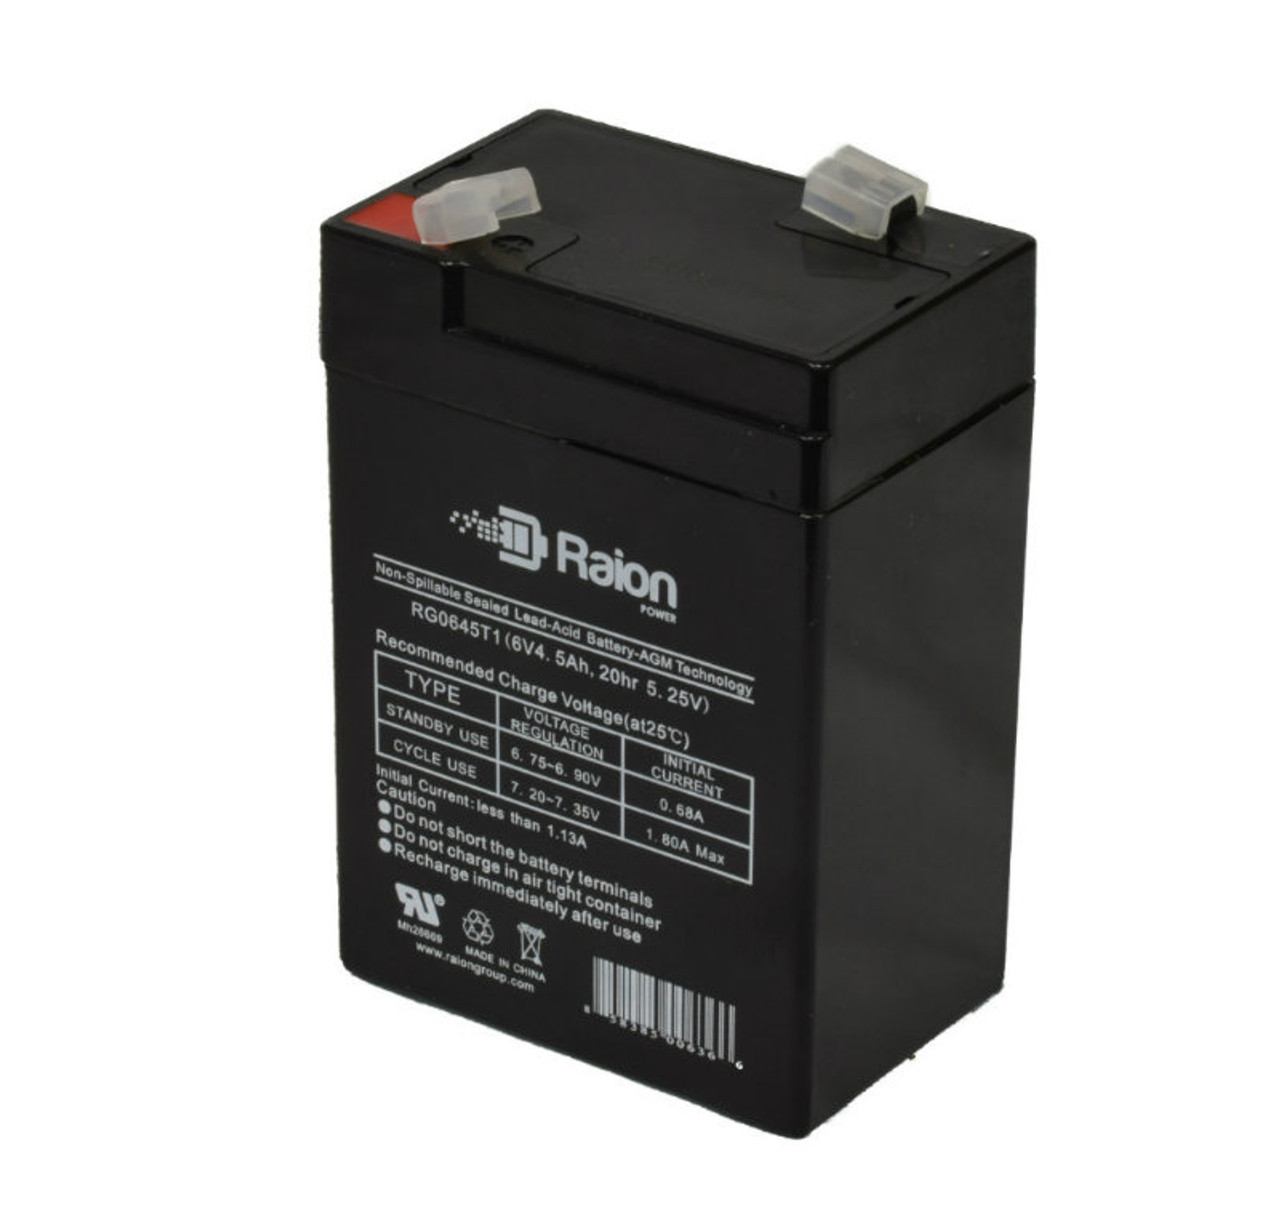 Raion Power RG0645T1 6V 4.5Ah Replacement Battery Cartridge for Peg Perego IGED1091 6V Polaris 400 Dragonfly